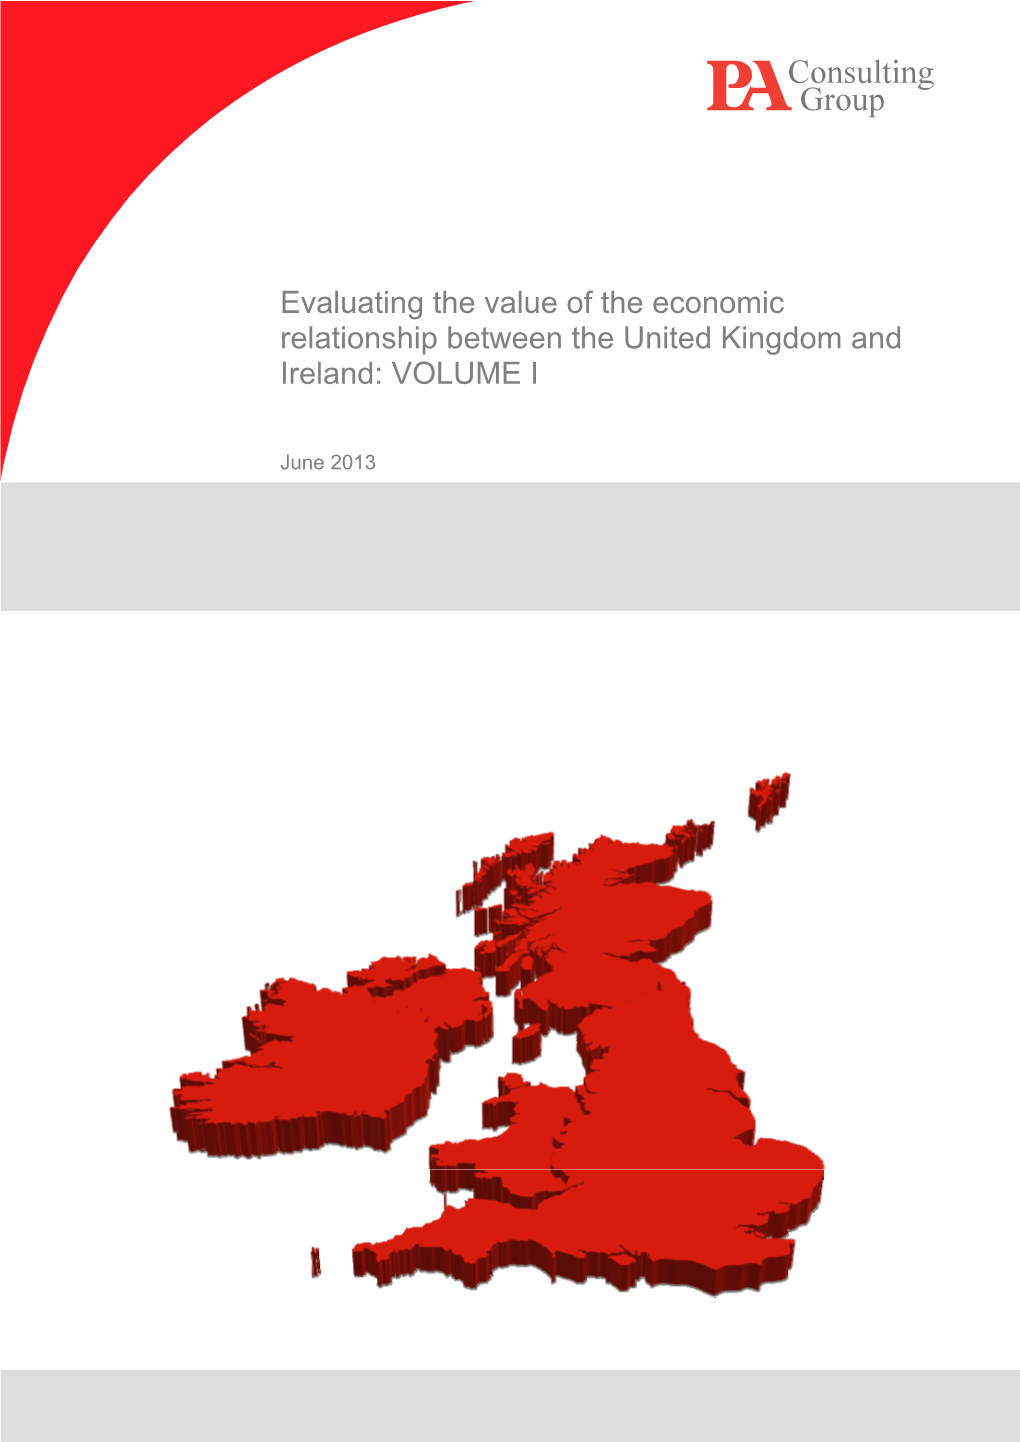 Evaluating the Value of the Economic Relationship Between the United Kingdom and Ireland: VOLUME I